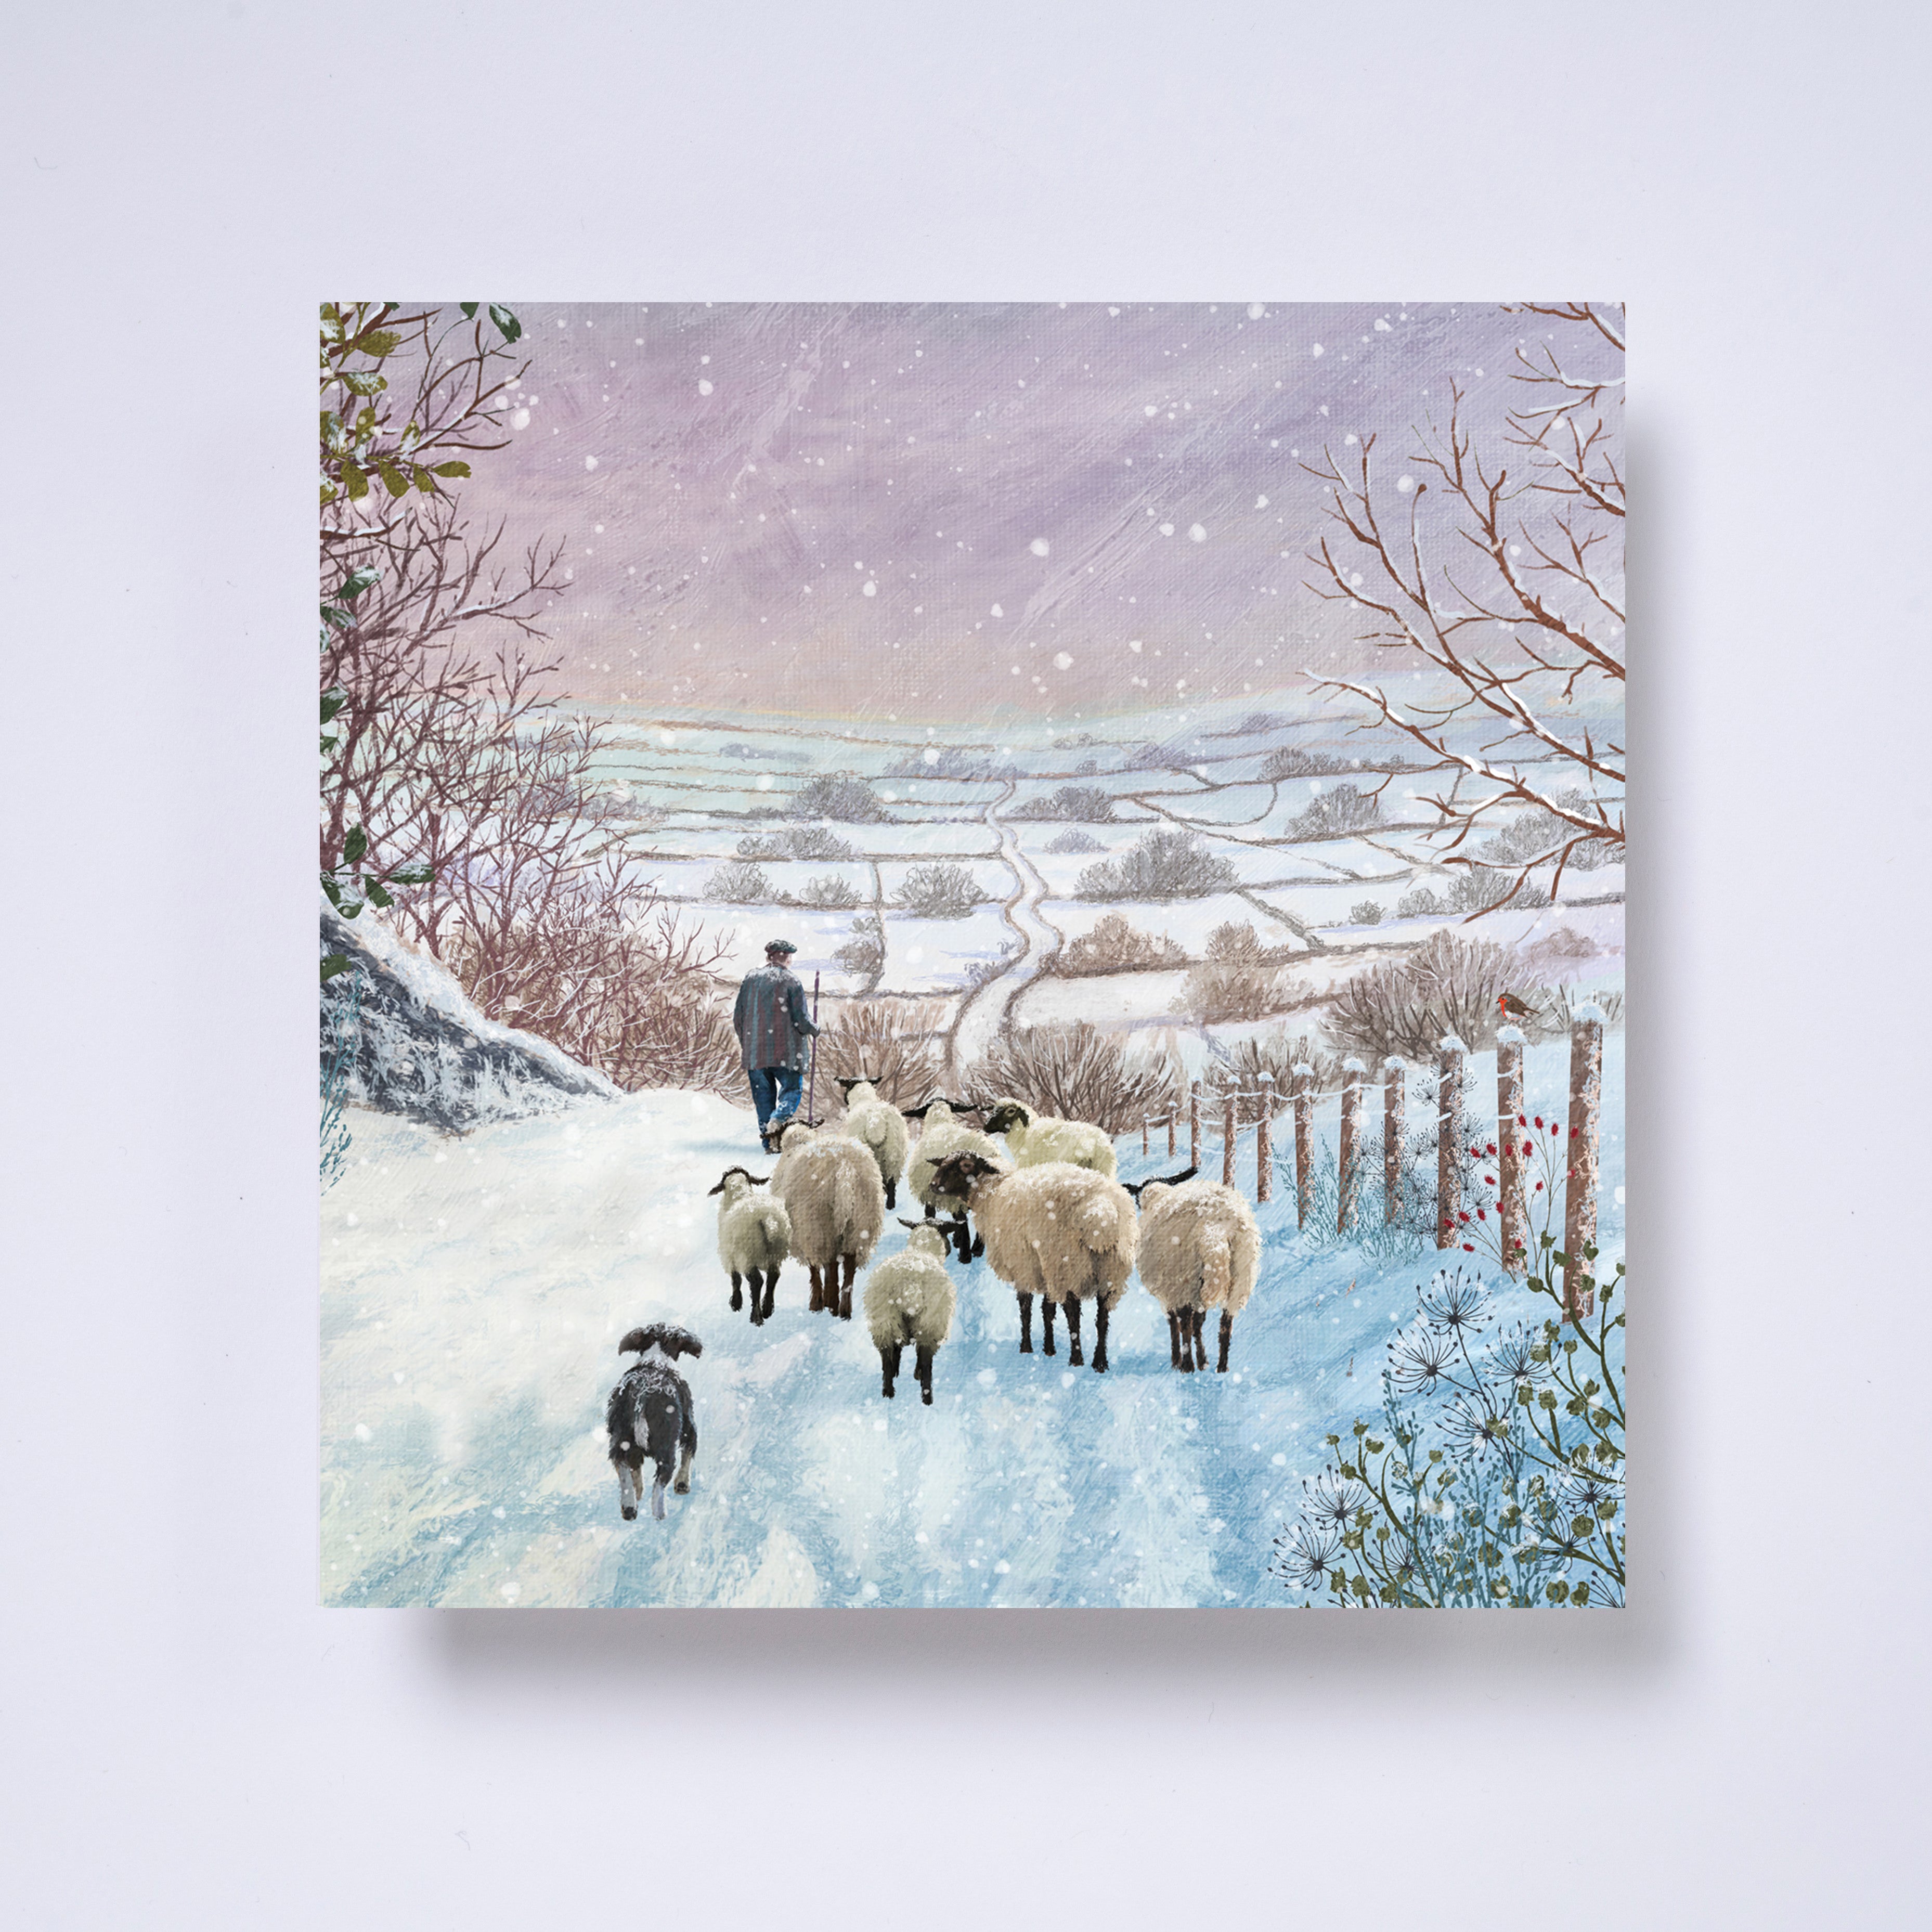 Shepherd - pack of 10 charity Christmas cards with envelopes